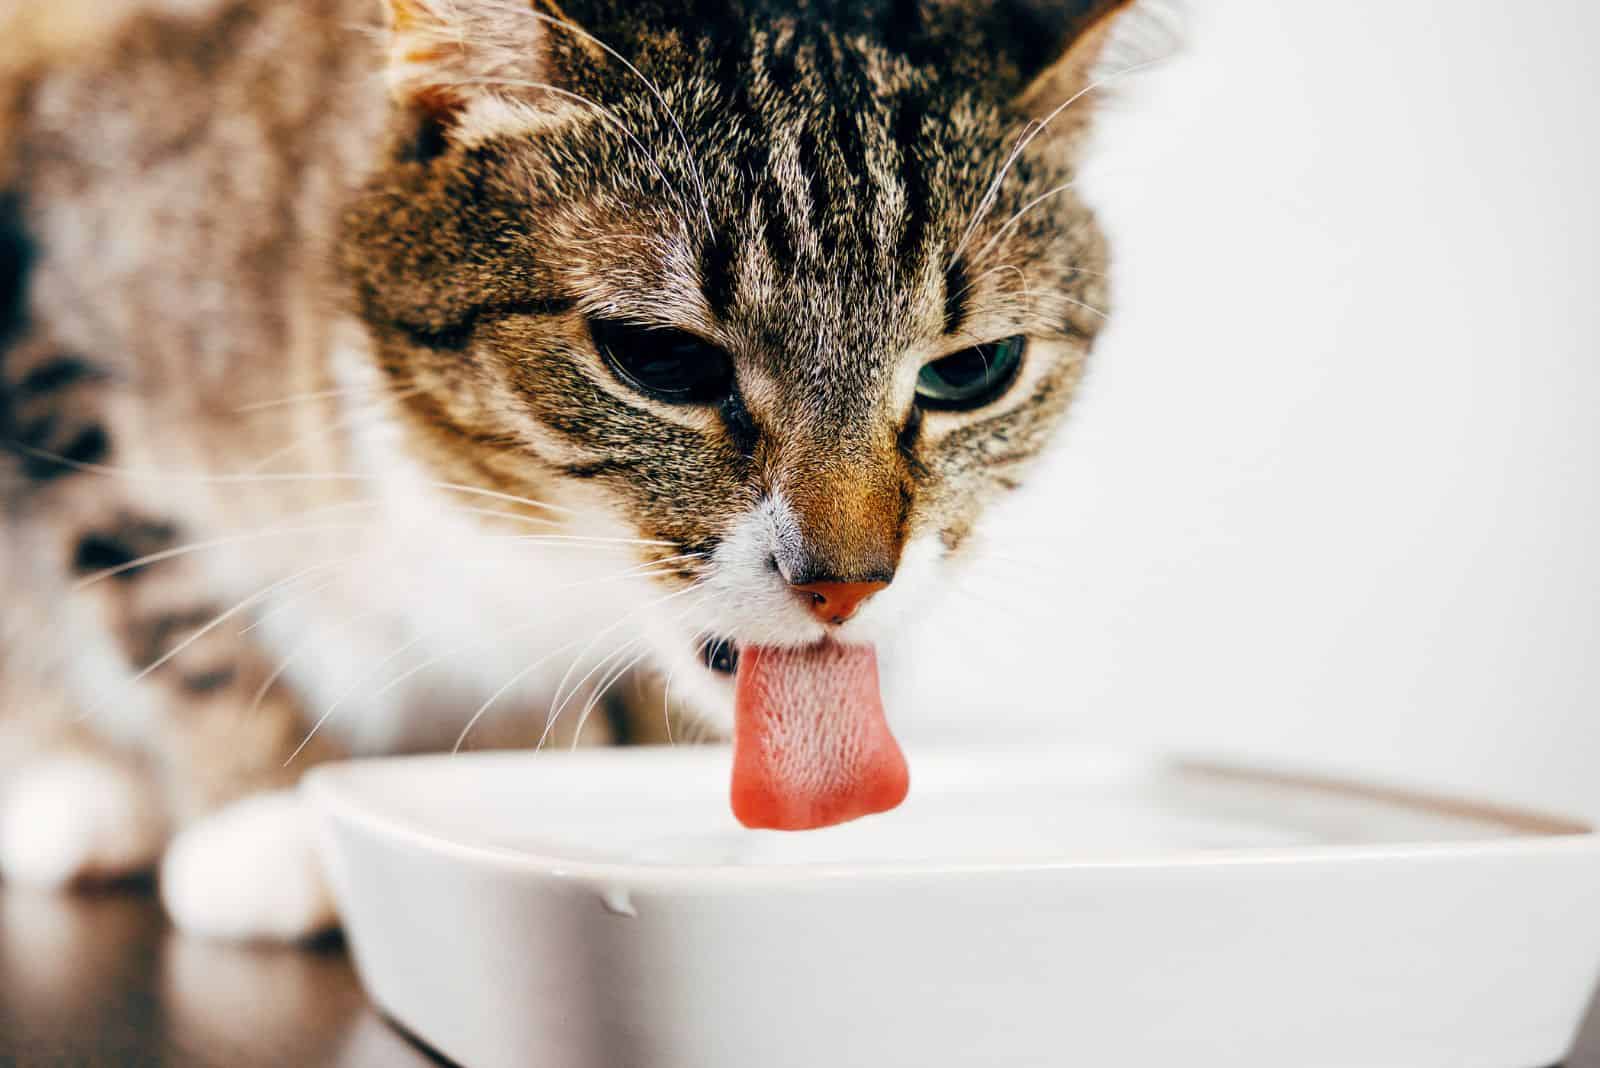 striped cat drinks water from plate